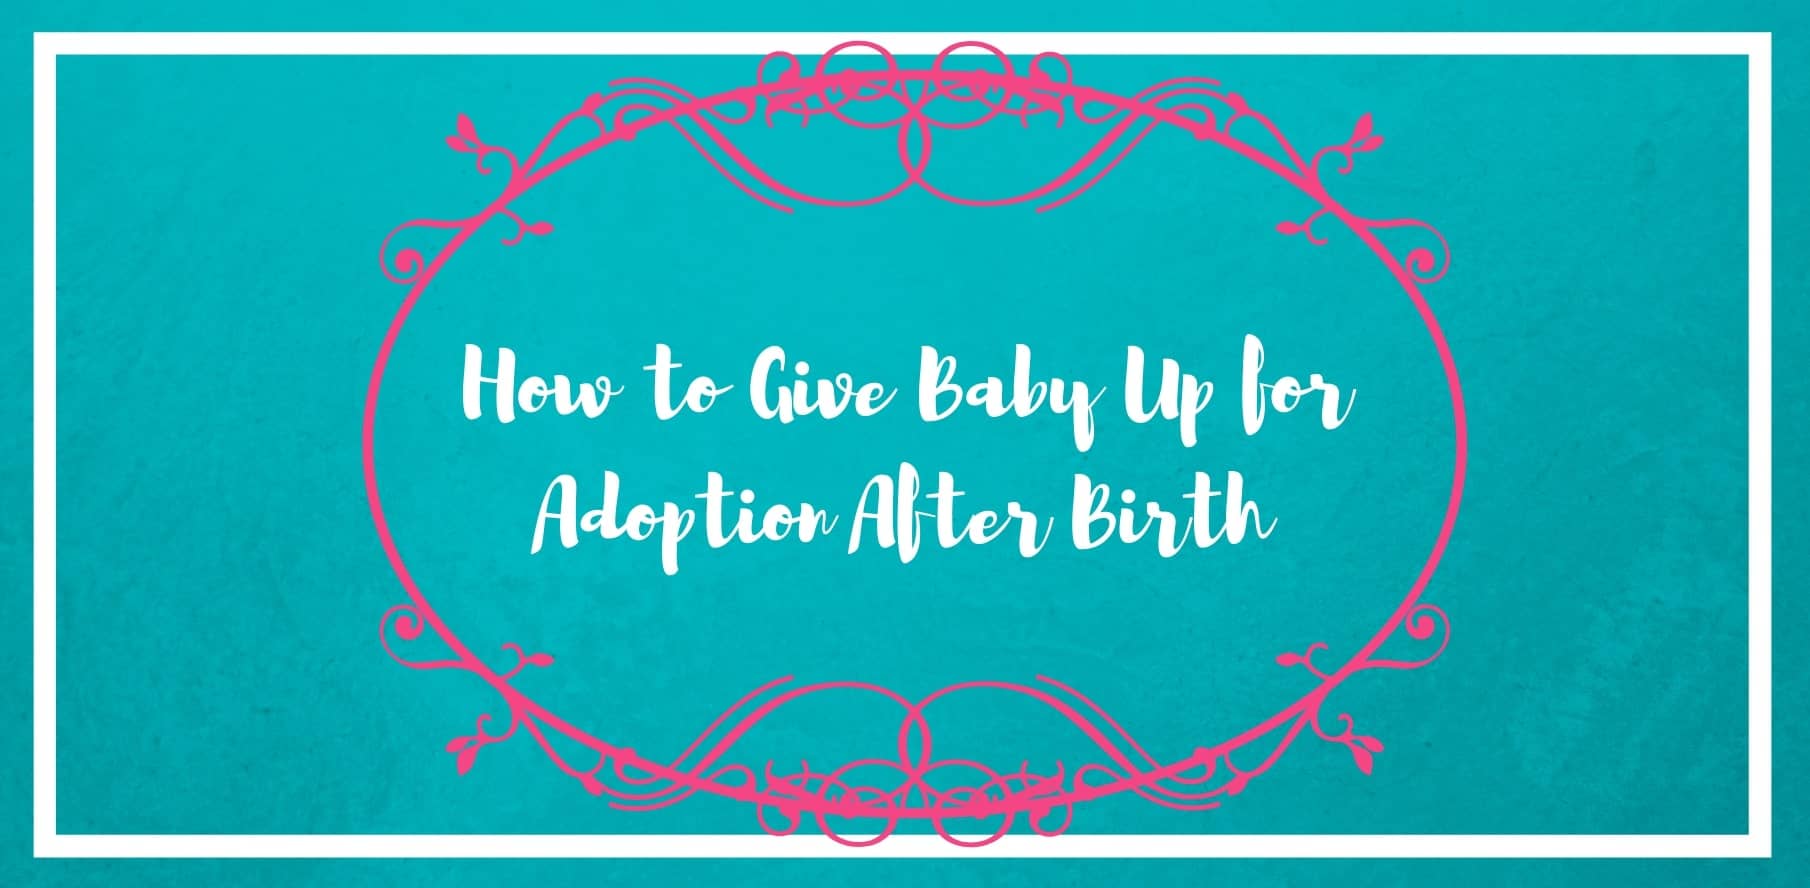 how to give a baby up for adoption after birth